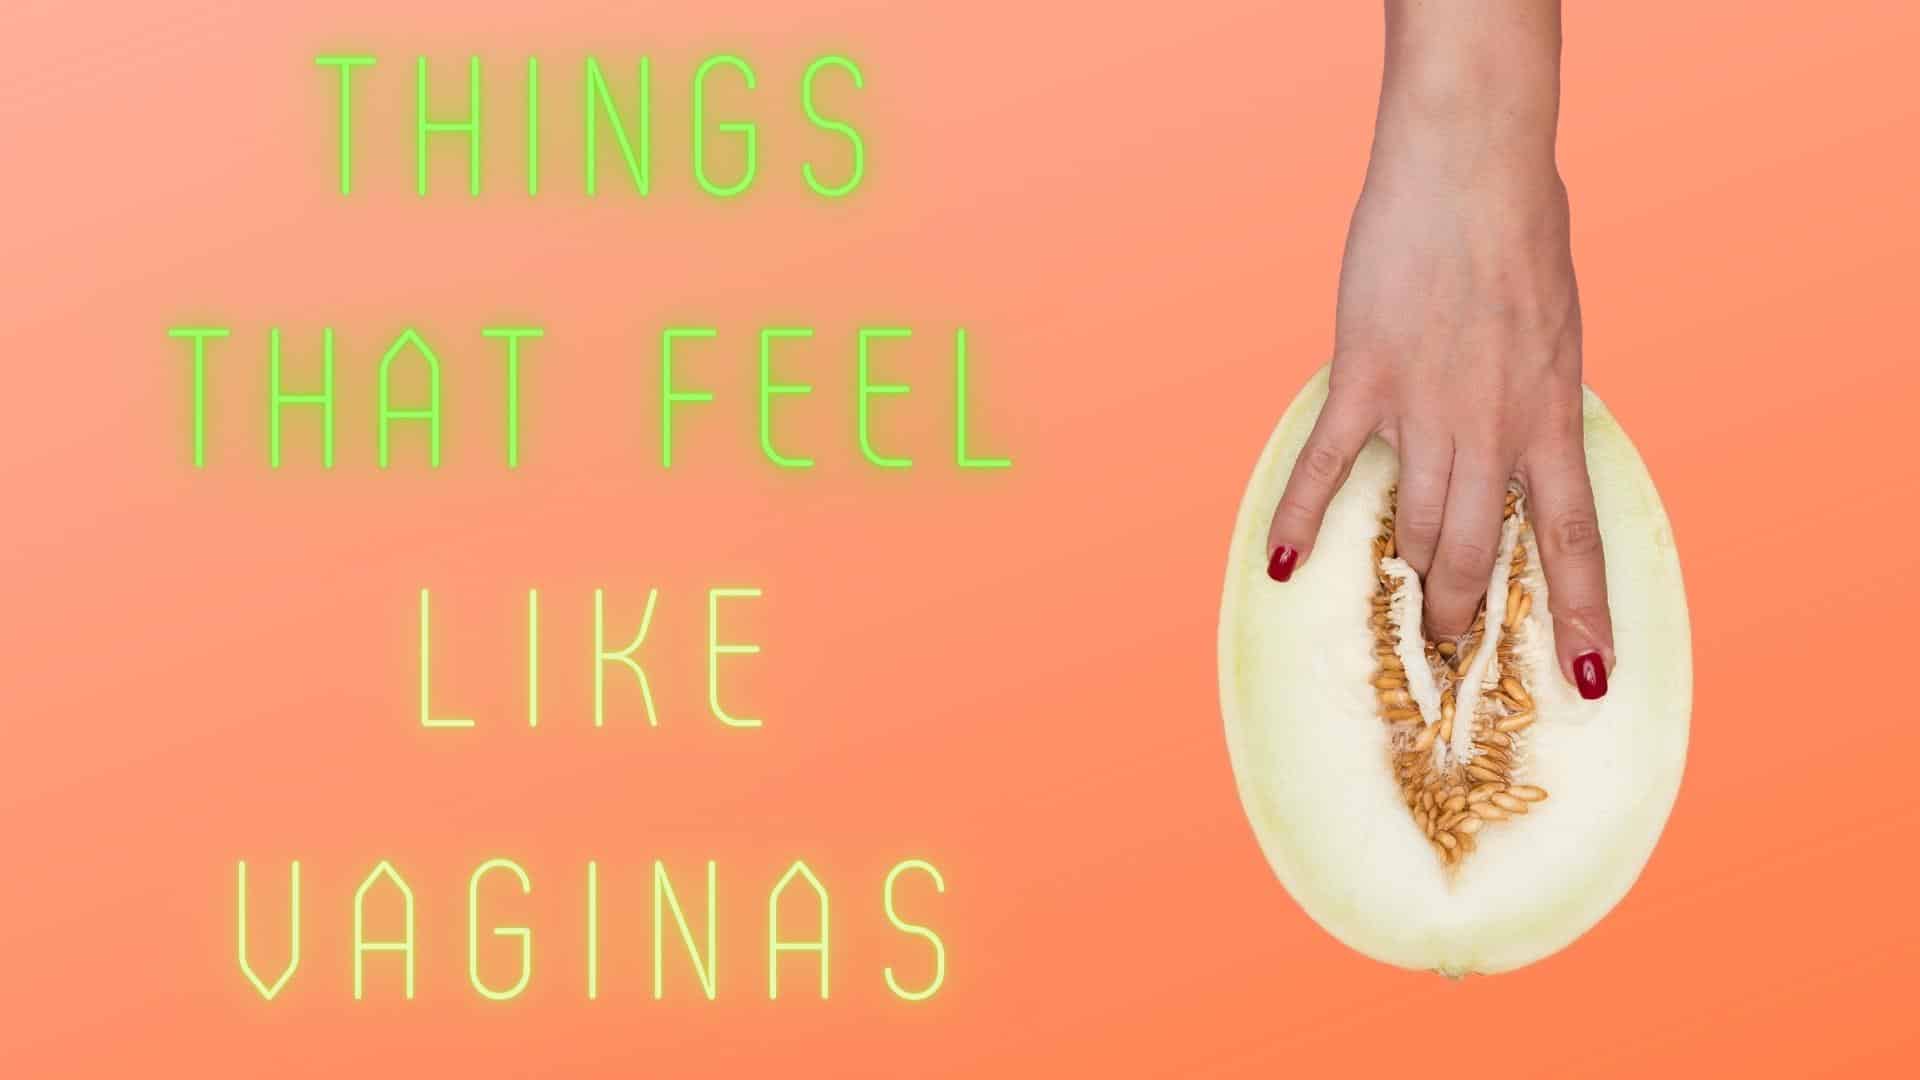 bill raker recommends Sticking Things In Vagina